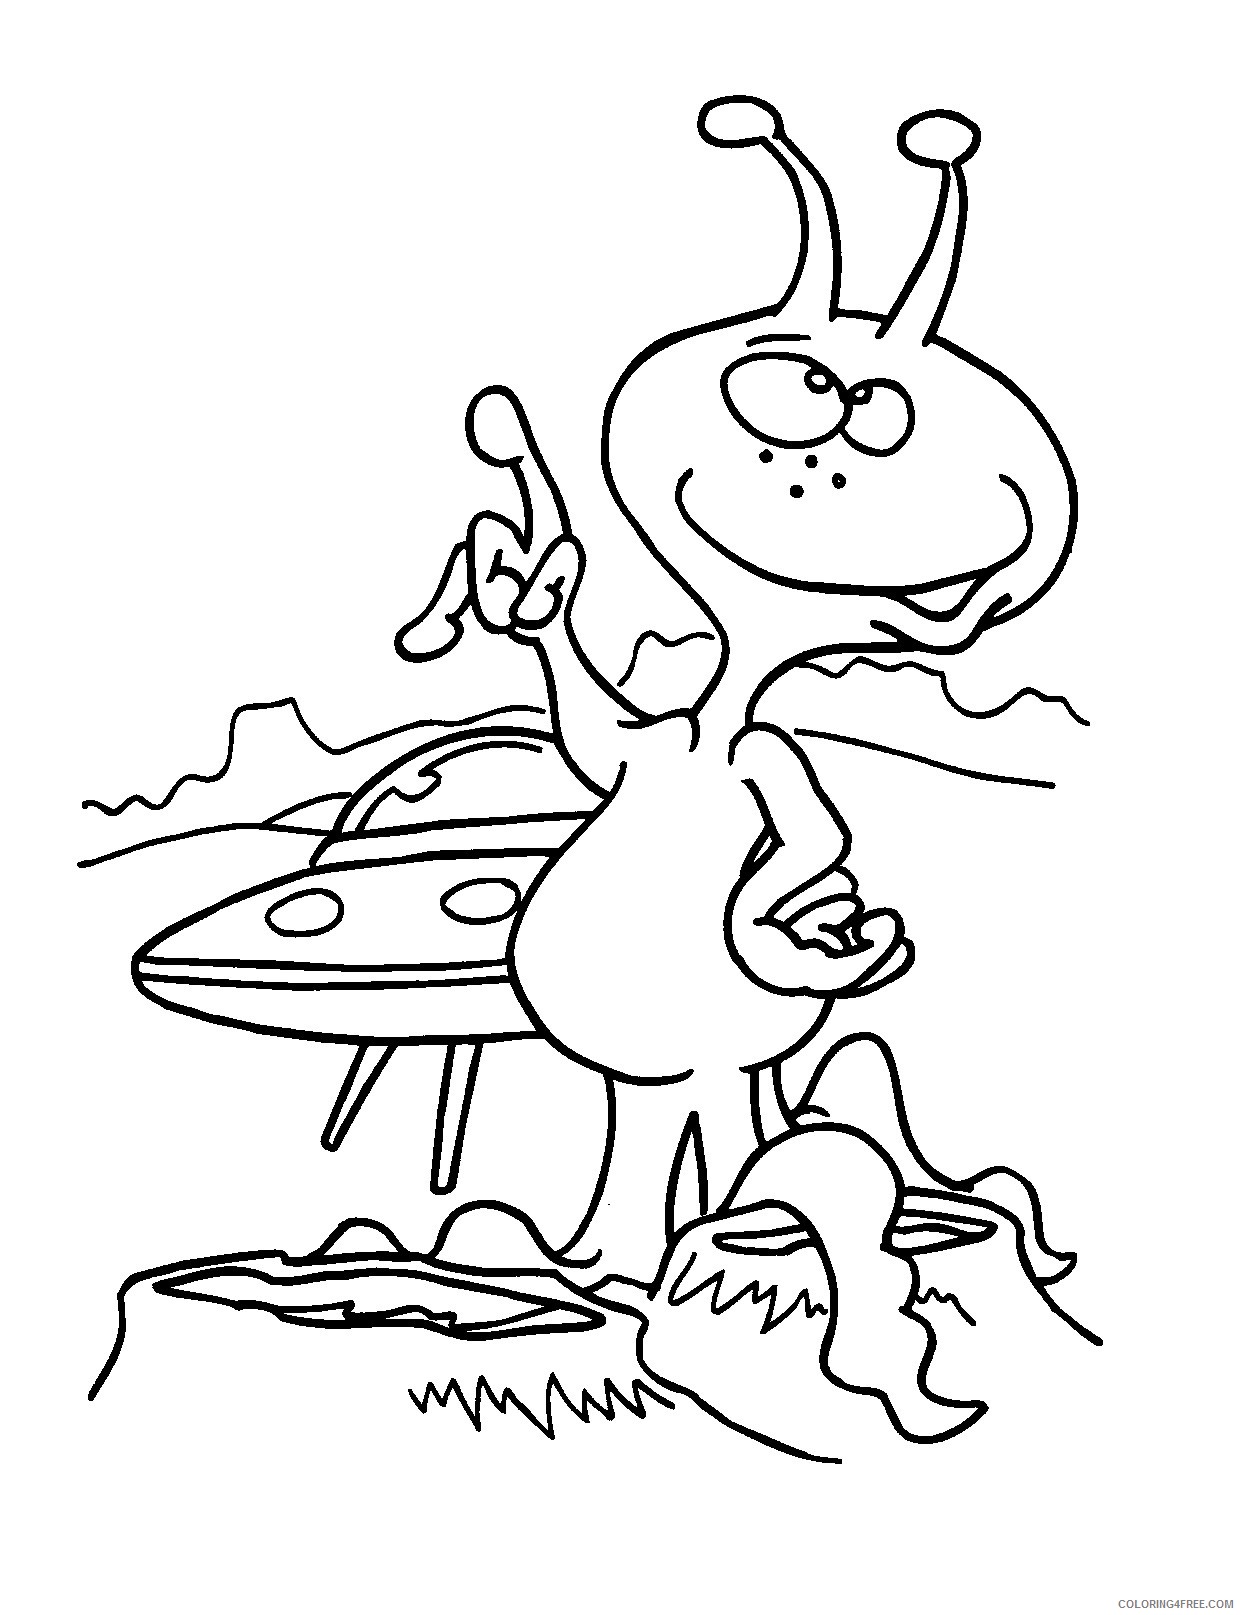 alien coloring pages to print Coloring4free